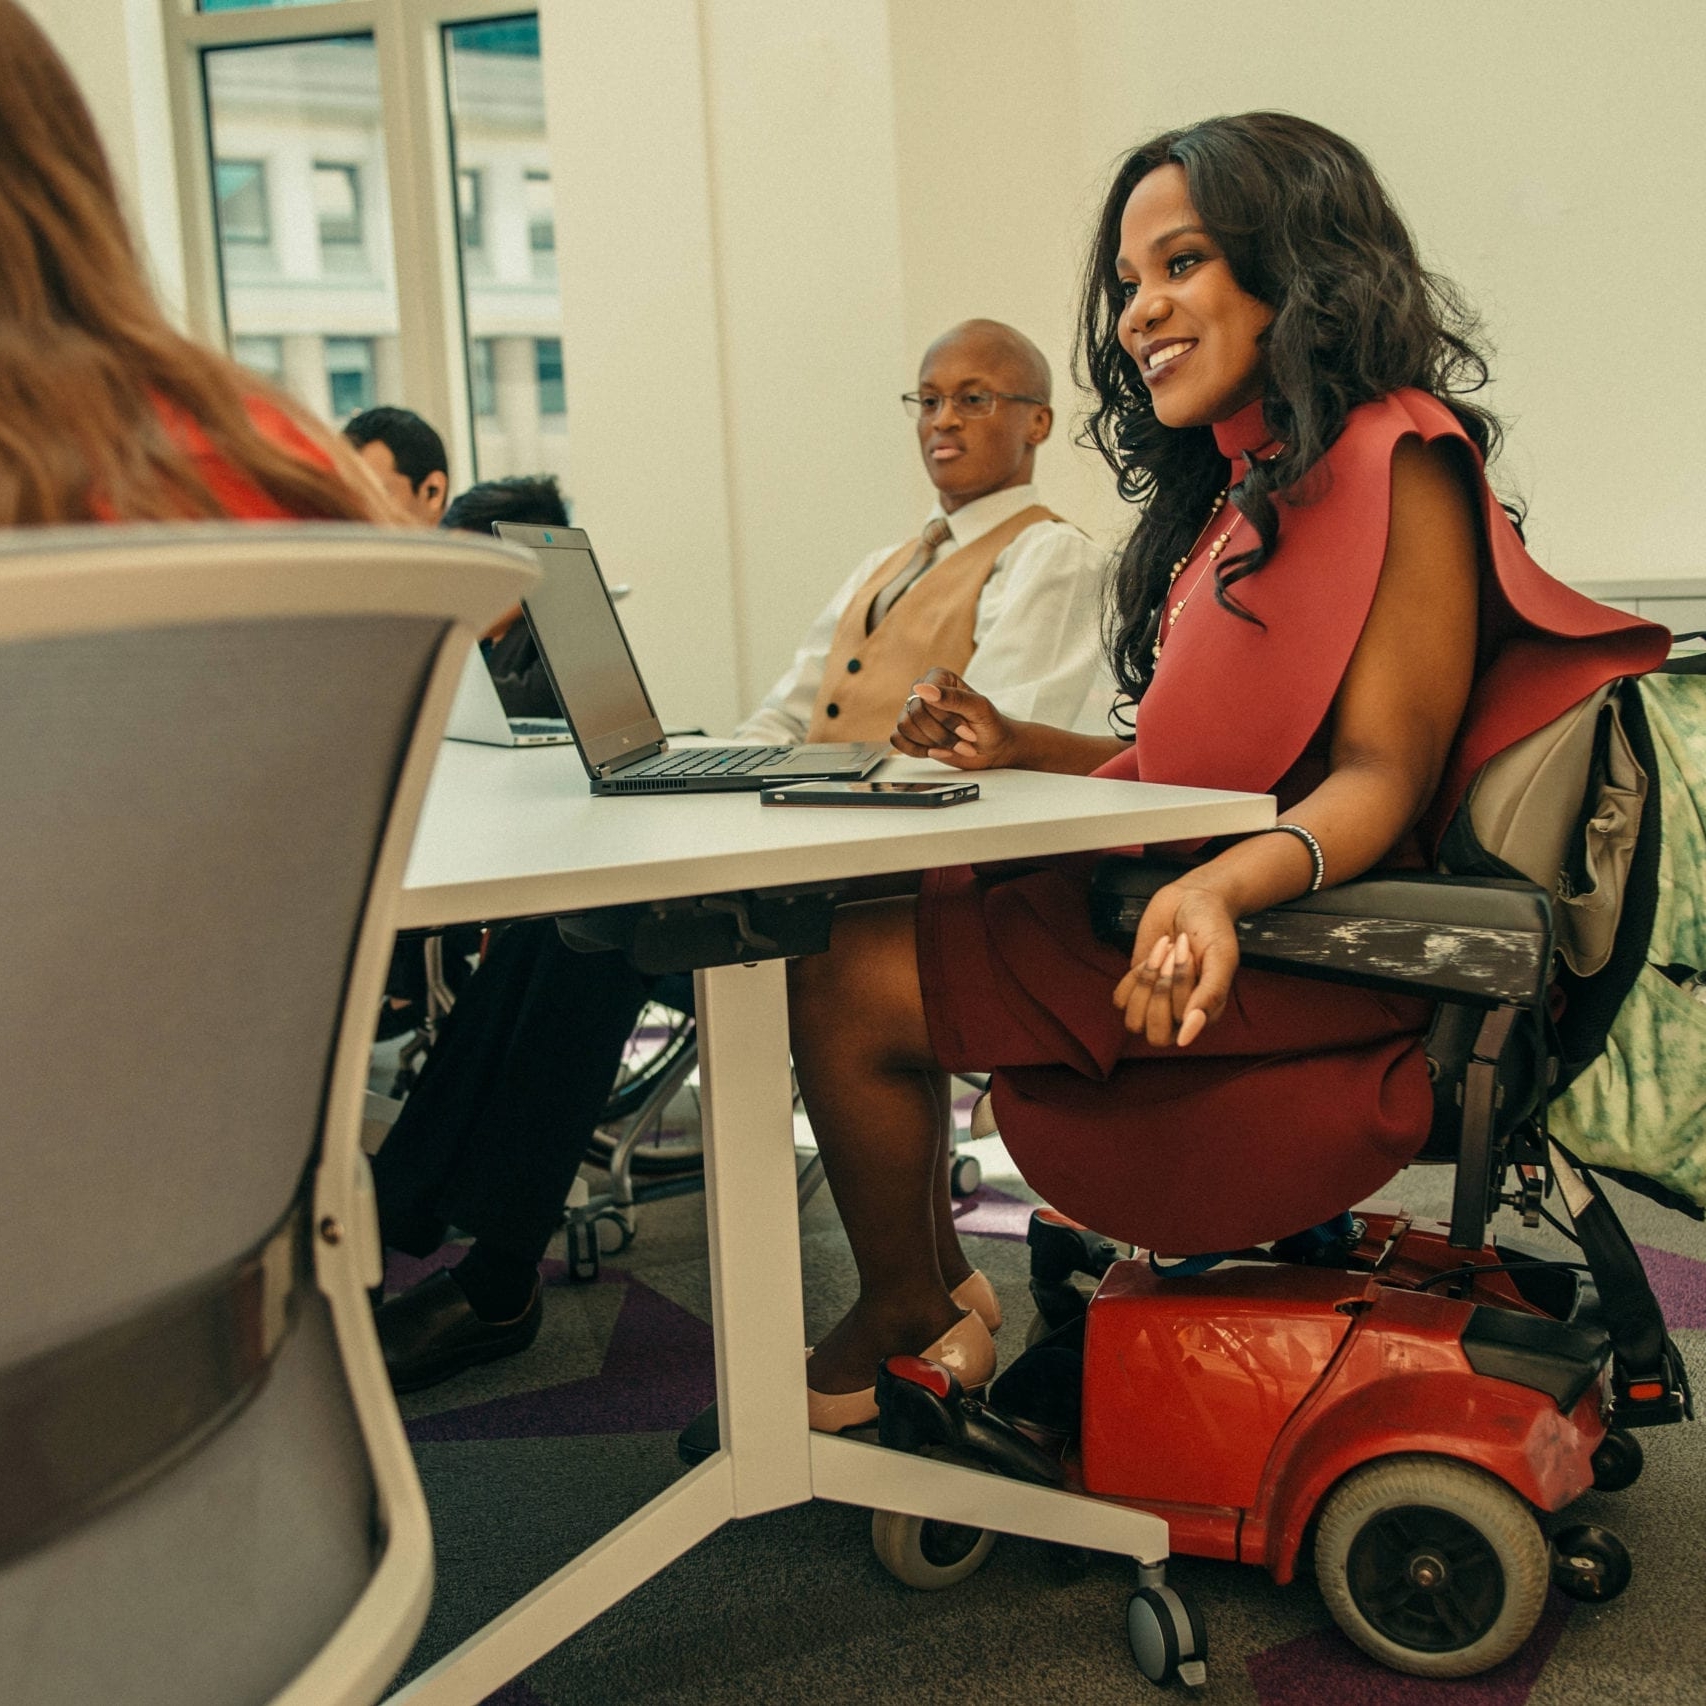 Group of people sit around a board room, focus on women dressed professionally in a motorized wheelchair.